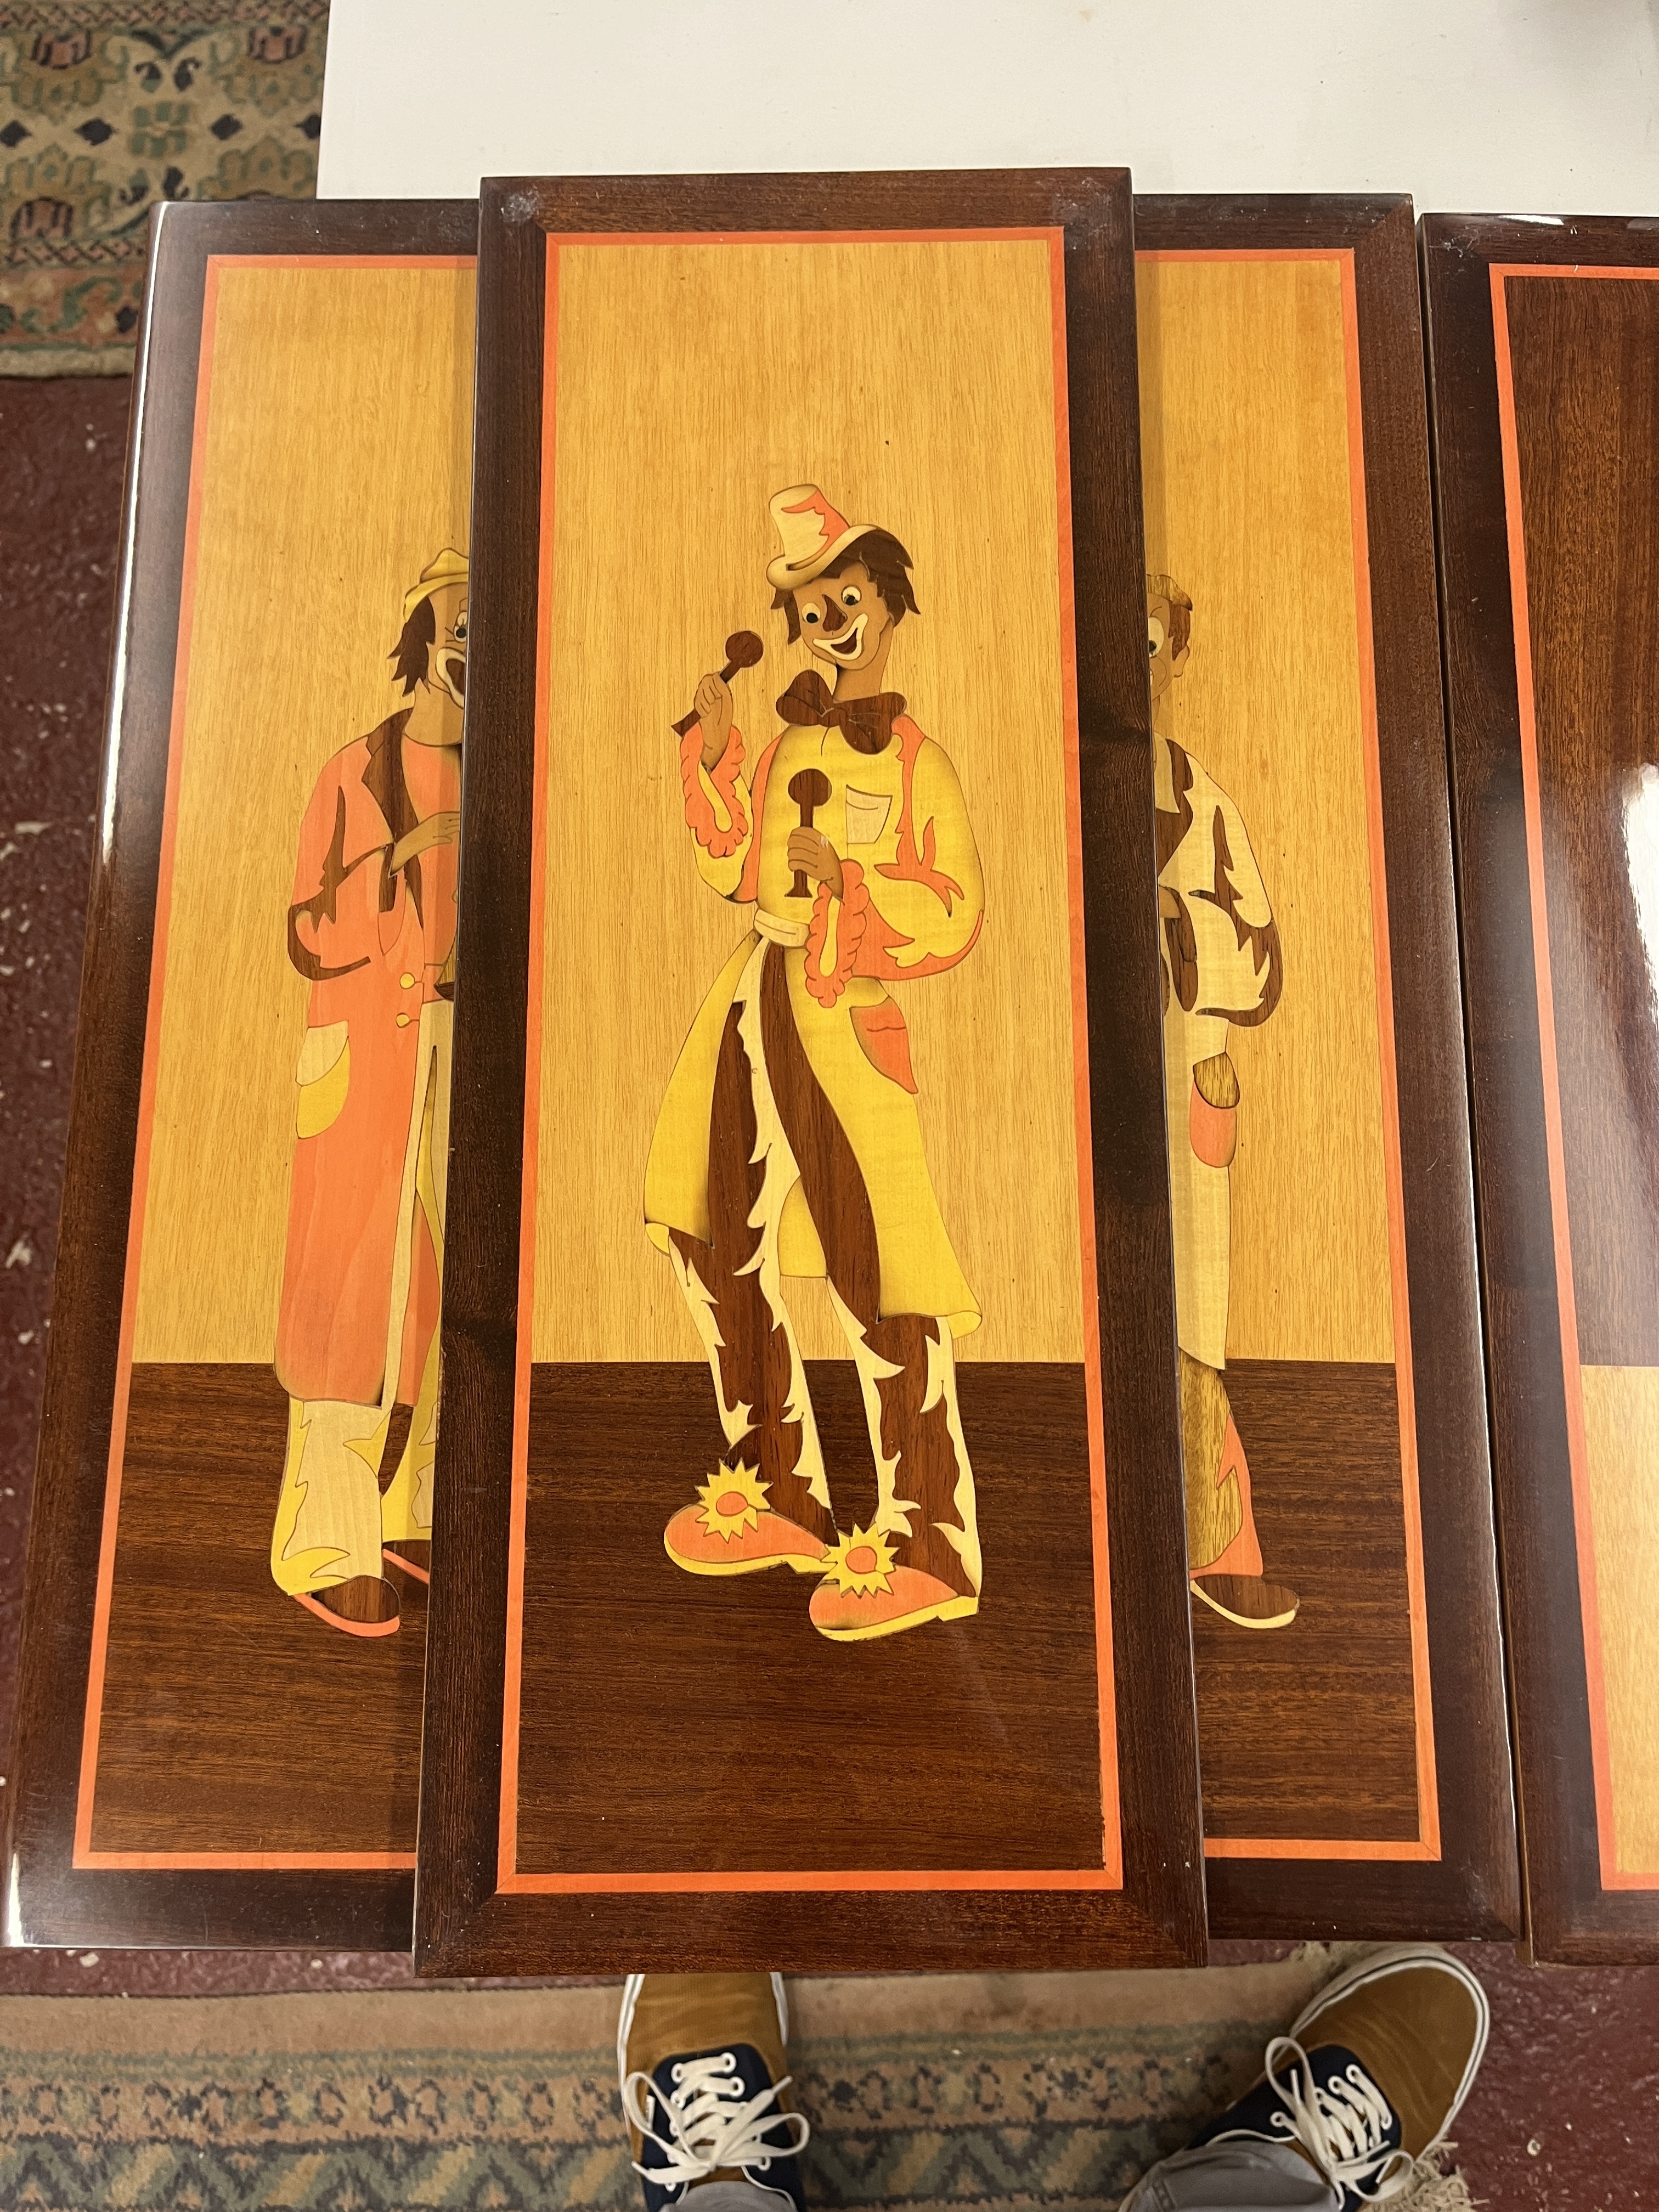 Set of 6 Italian marquetry wooden pictures of clowns - Image 5 of 7